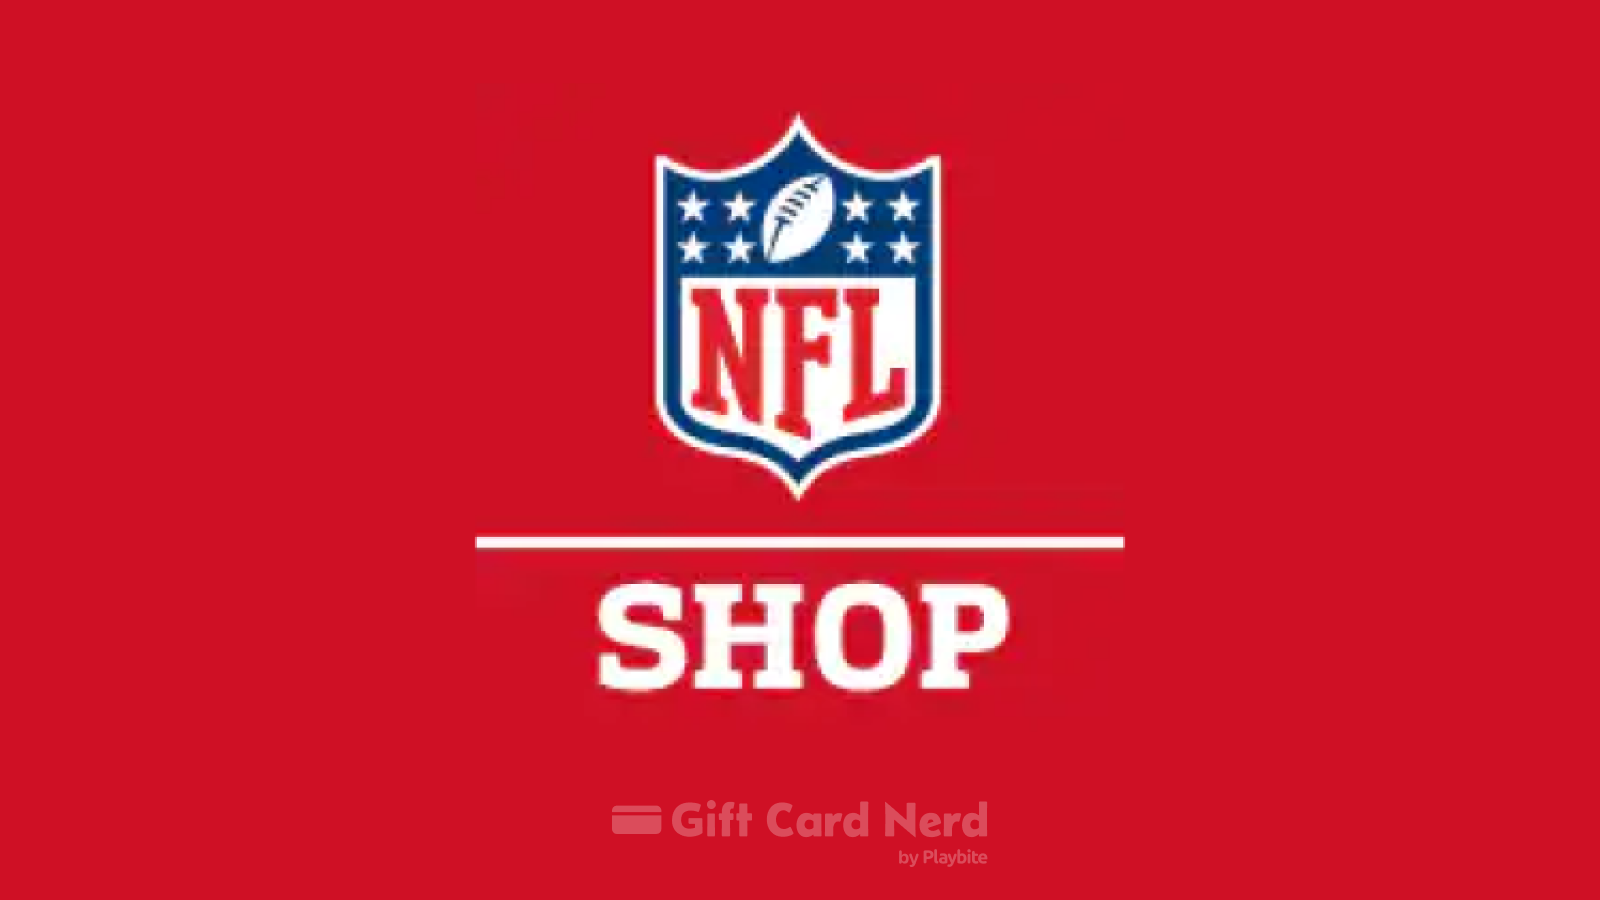 Can I Use an NFL Shop Gift Card on DoorDash?